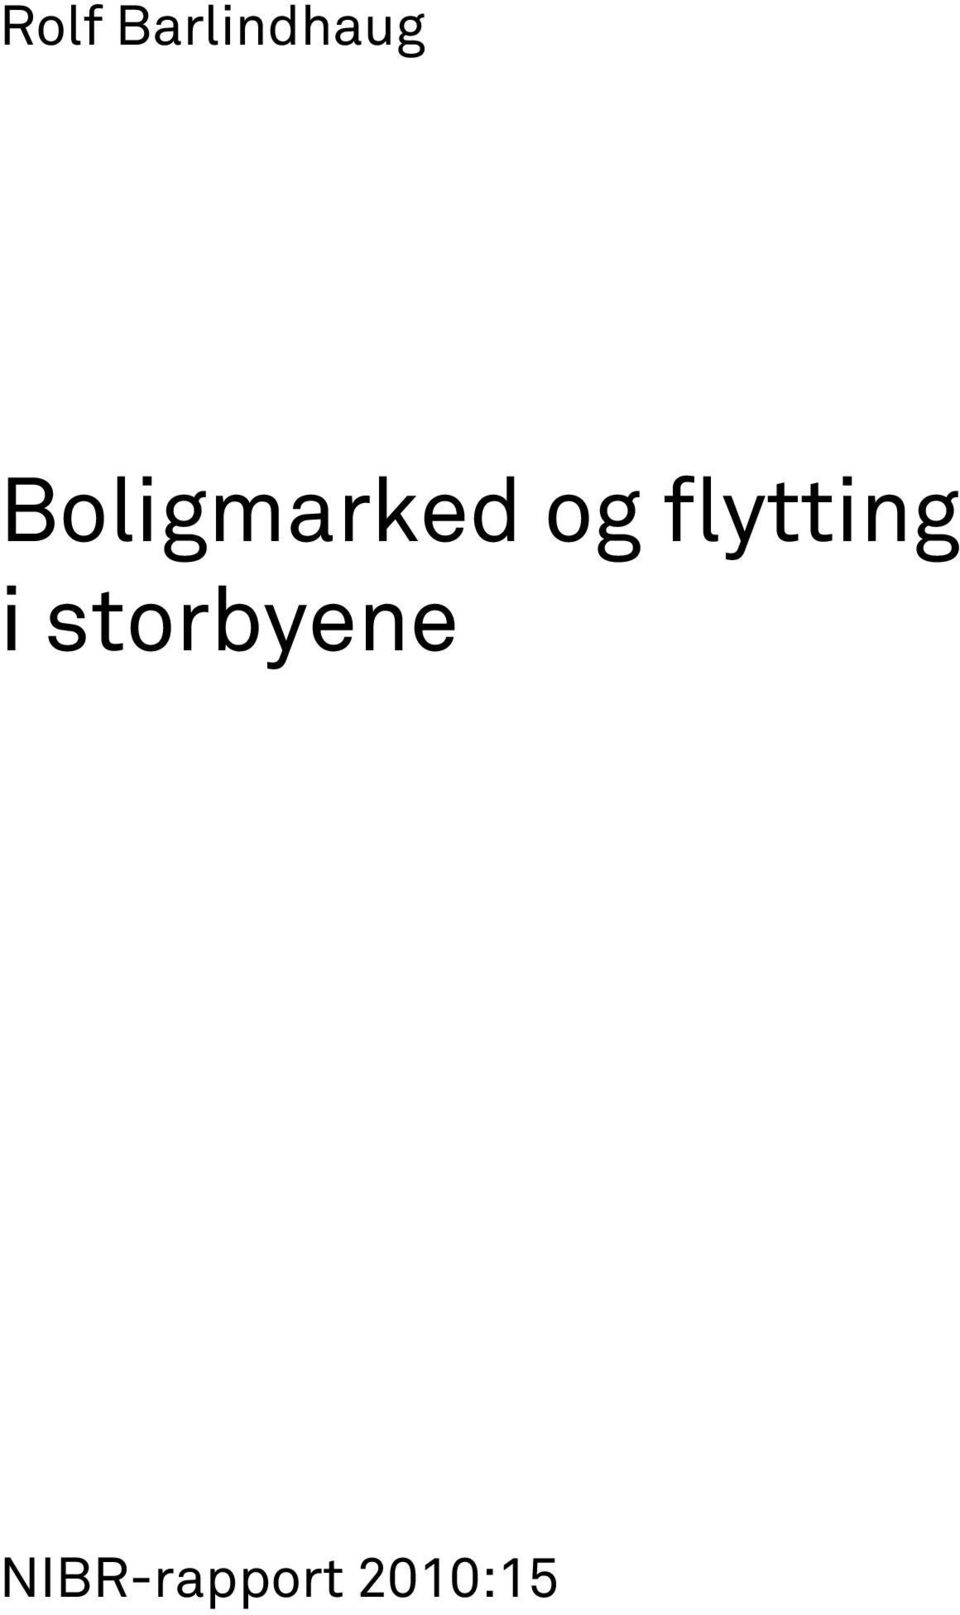 Boligmarked